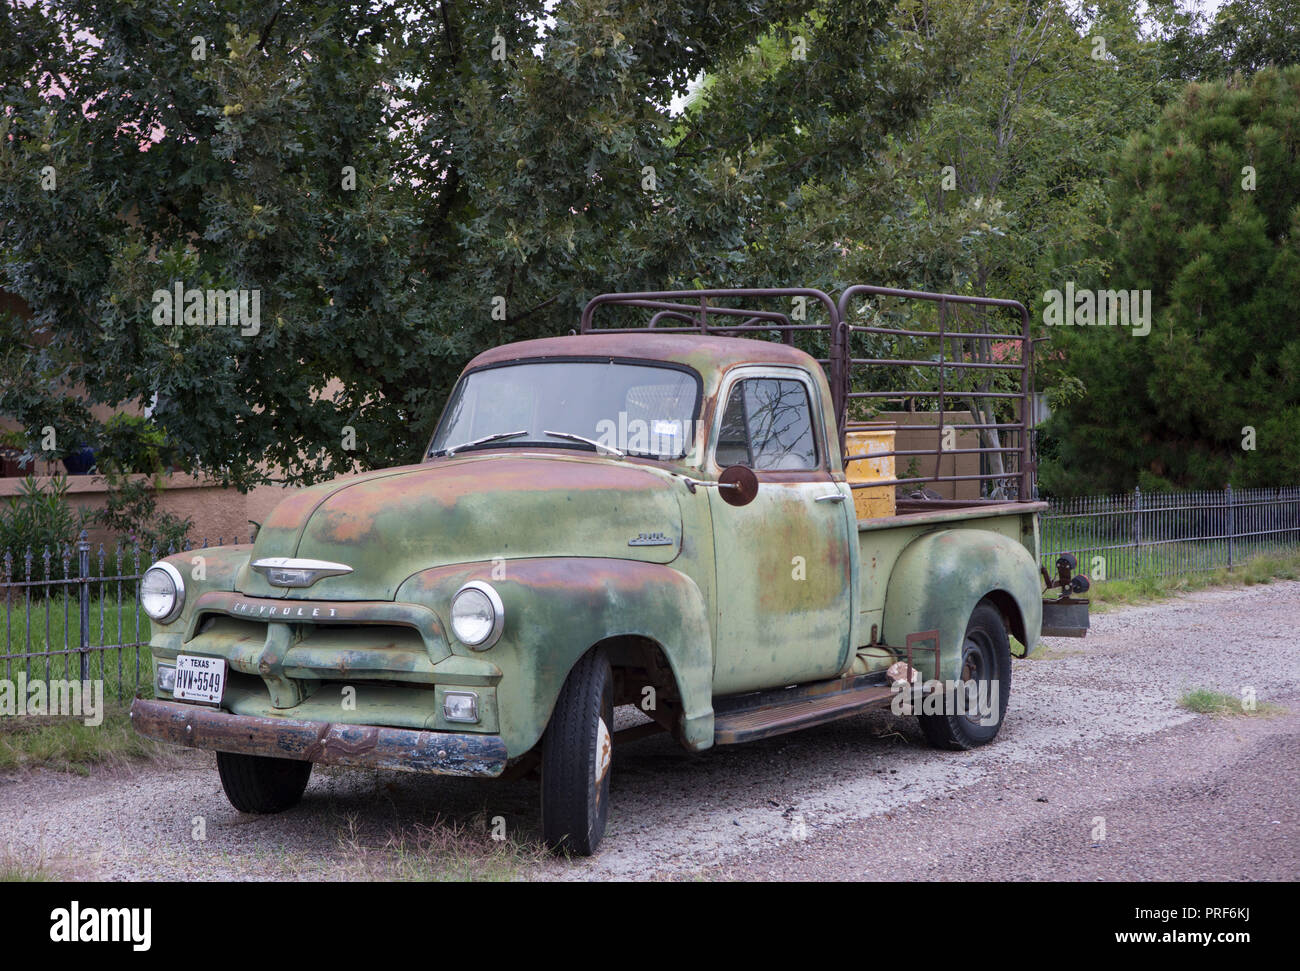 Old Chevrolet Trucks from the 1950s in Alpine, Texas. Stock Photo